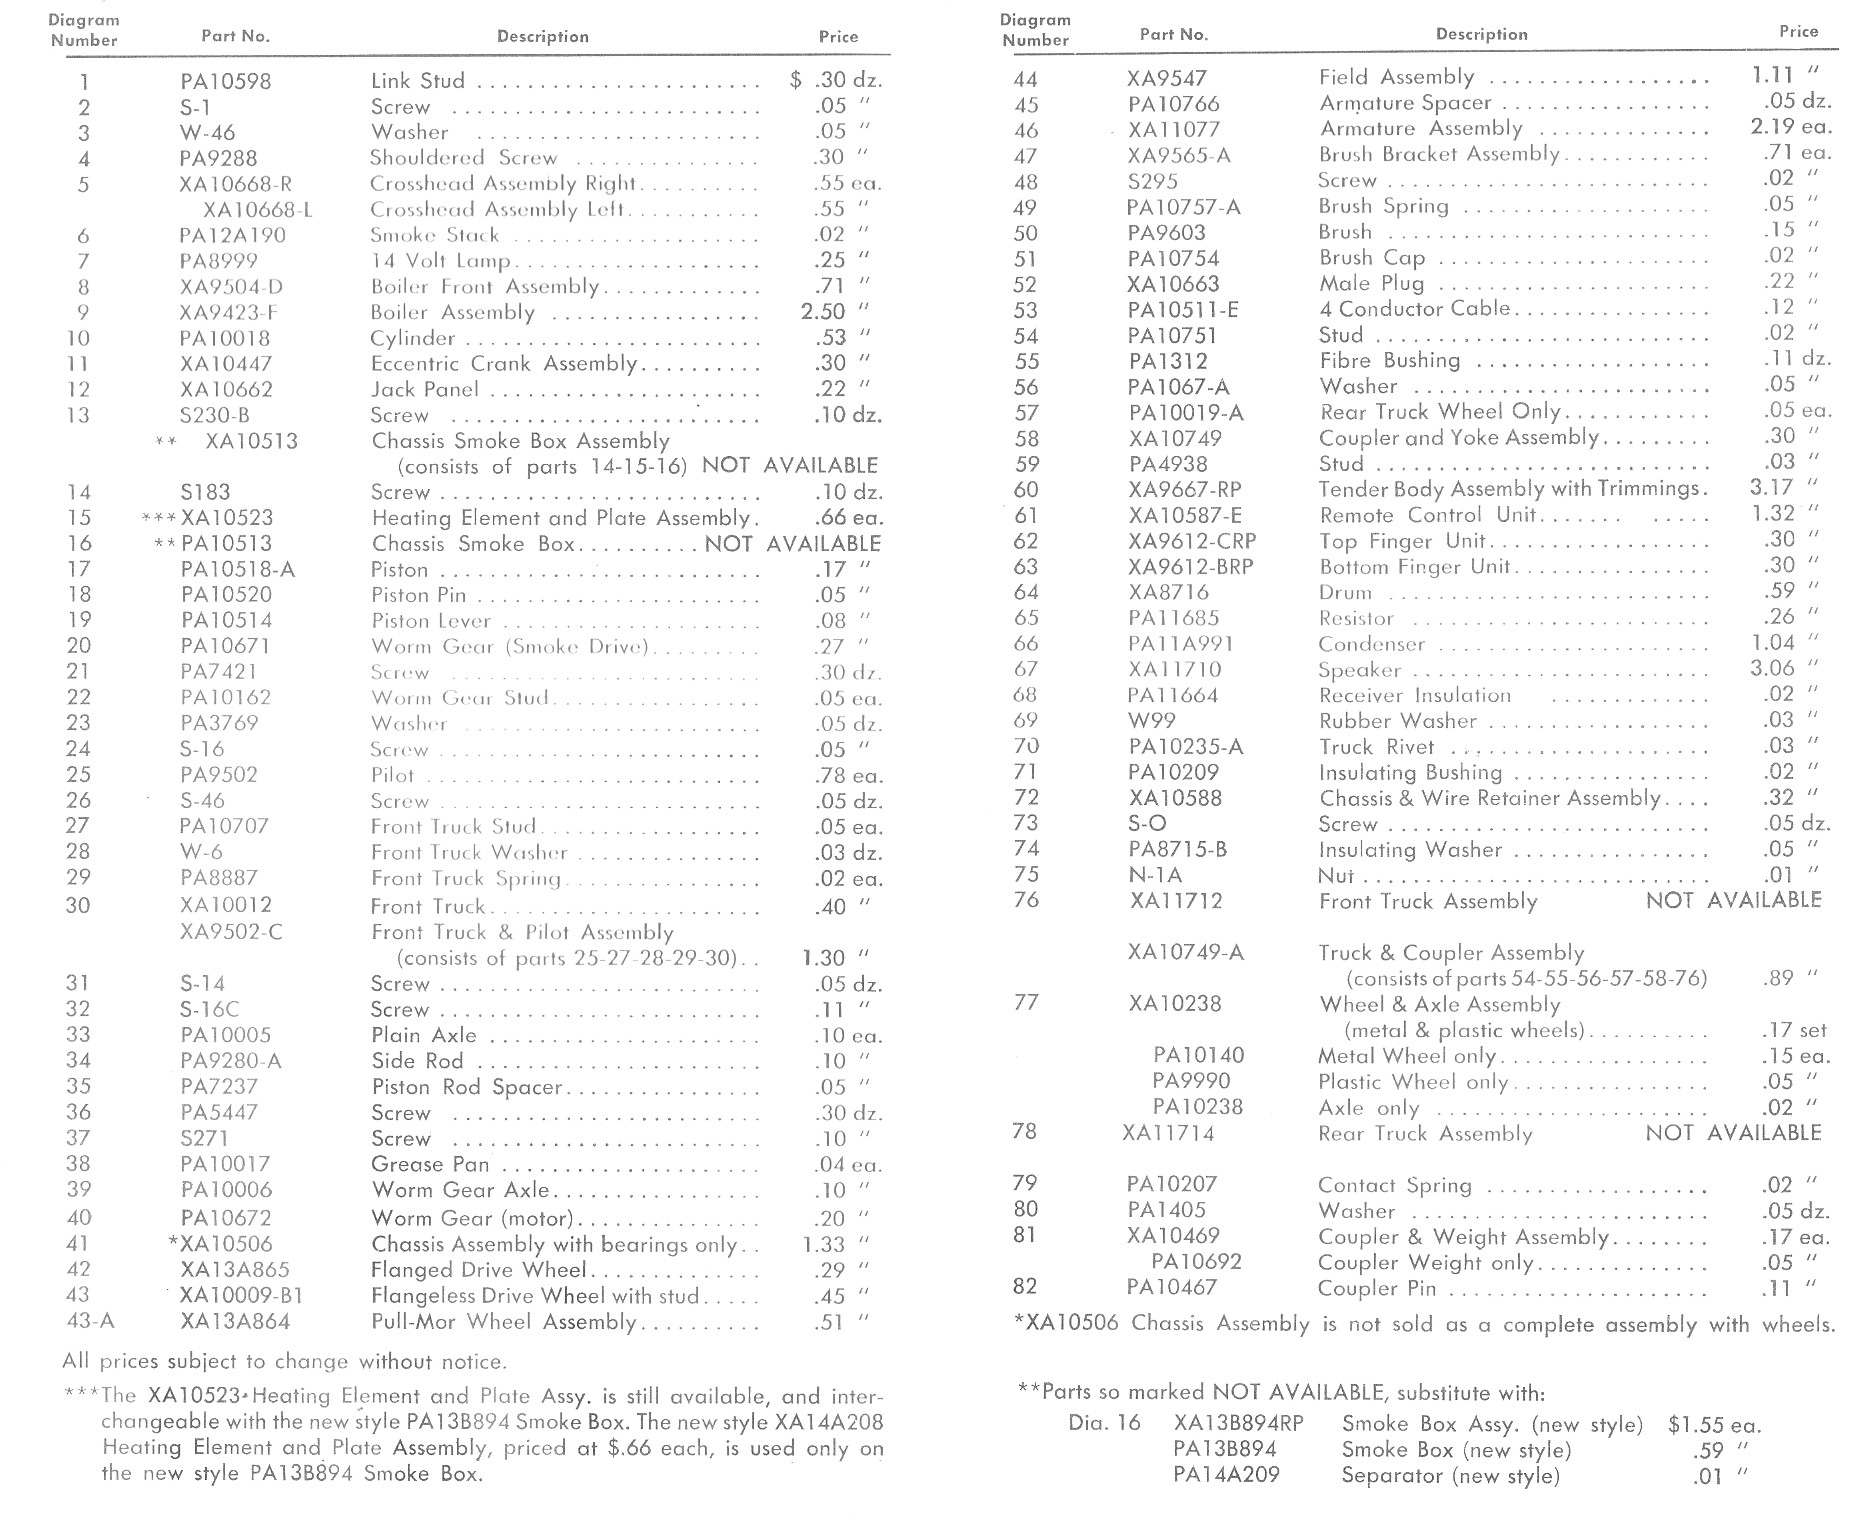 American Flyer Locomotive & Tender 315 Parts List and Diagram - Page 3